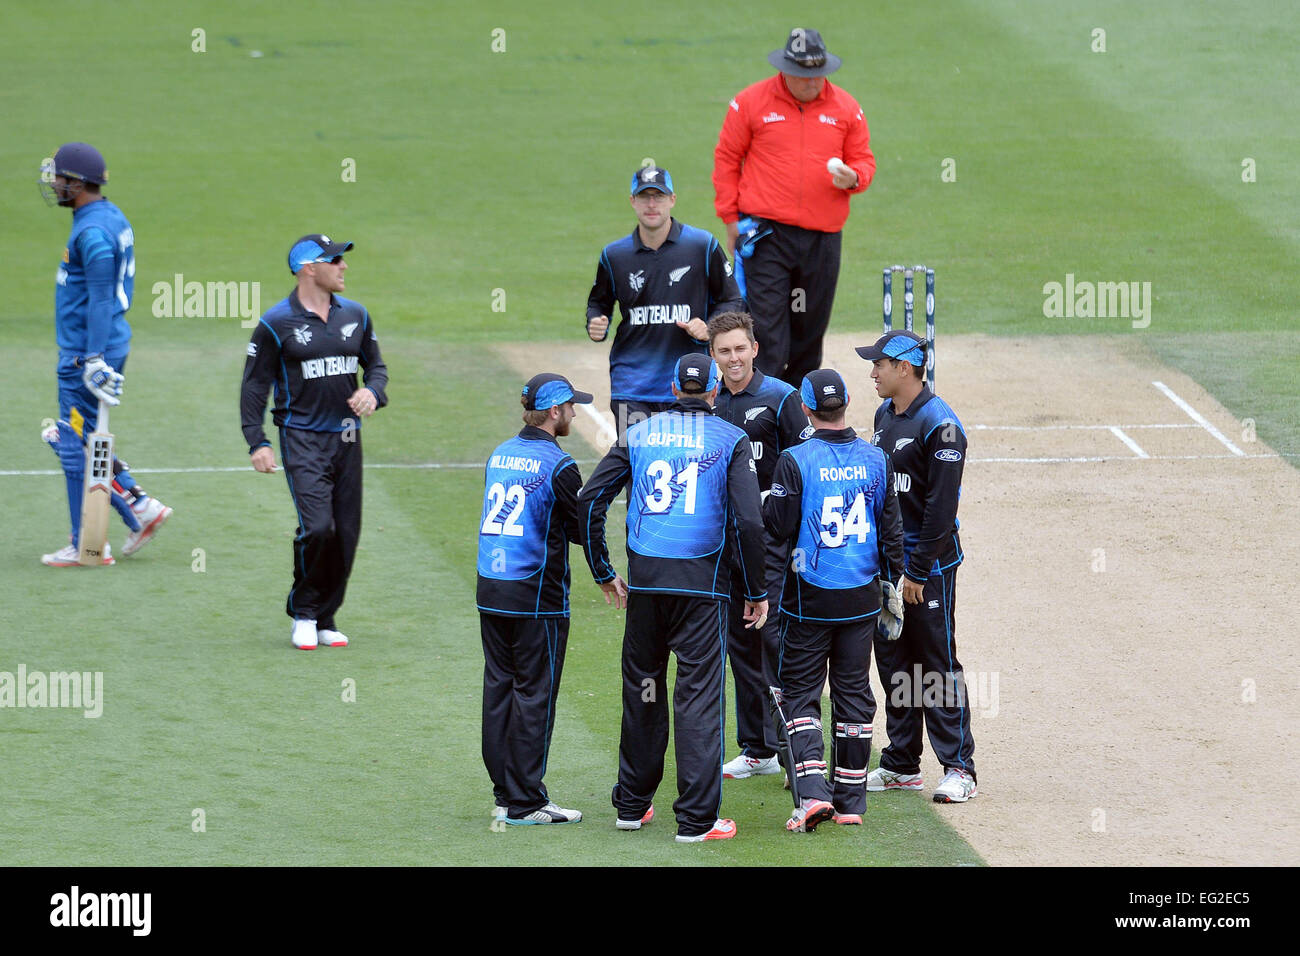 Christchurch, New Zealand. 14th Feb, 2015. Christchurch, New Zealand - February 14, 2015 - Trent Boult of New Zealand (M) and his teammates celebrating during the ICC Cricket World Cup Match between Sri Lanka and New Zealand at Hagley Oval on February 14, 2015 in Christchurch, New Zealand. © dpa/Alamy Live News Stock Photo